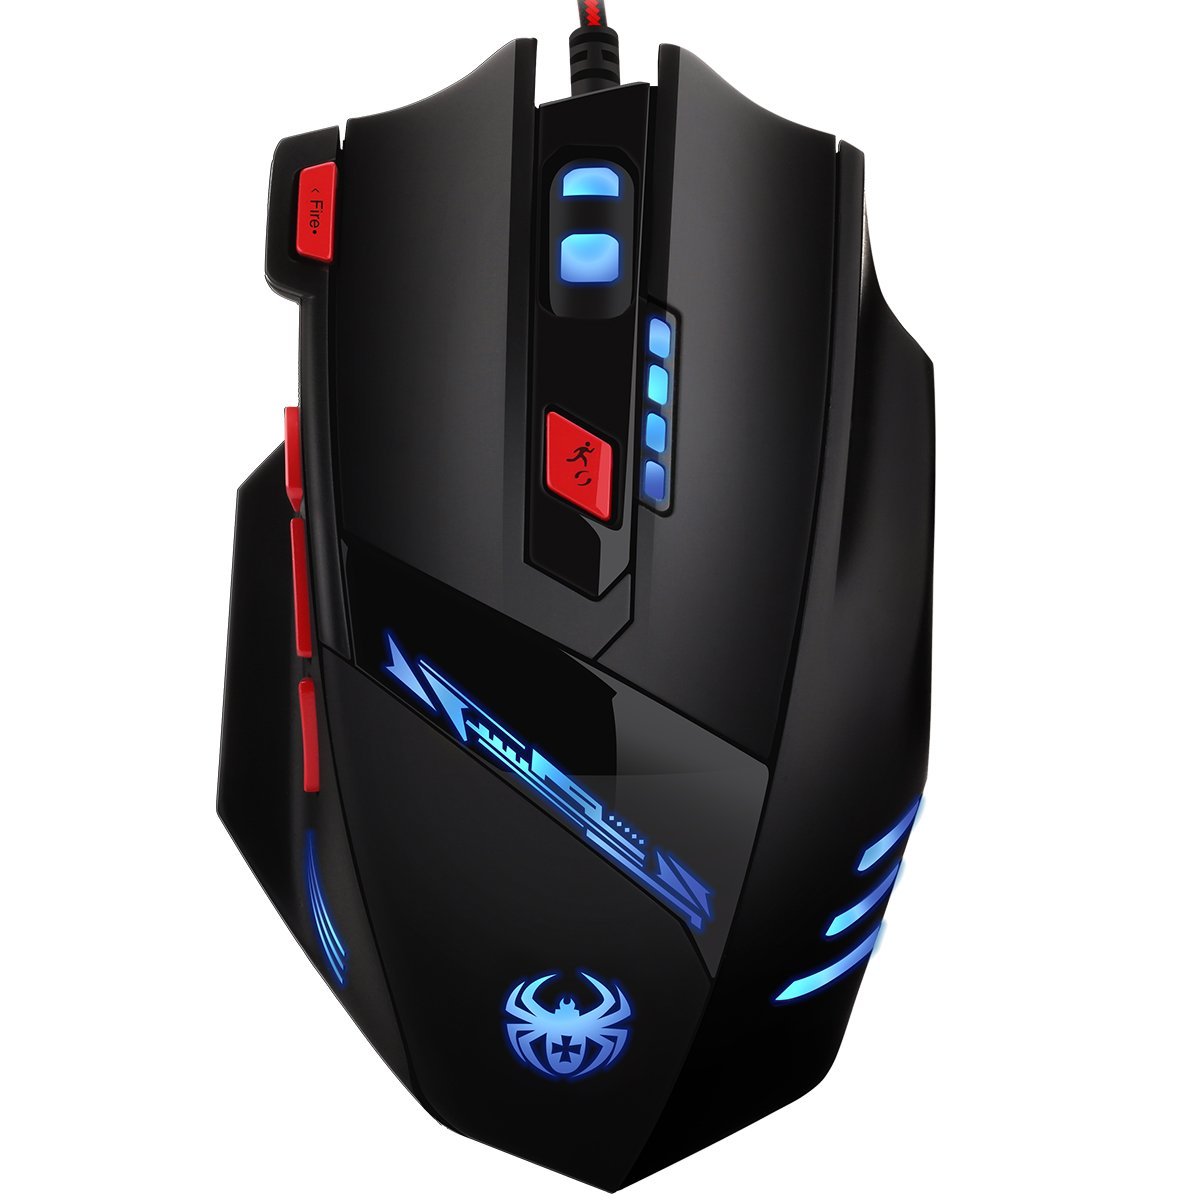 wired gaming mouse